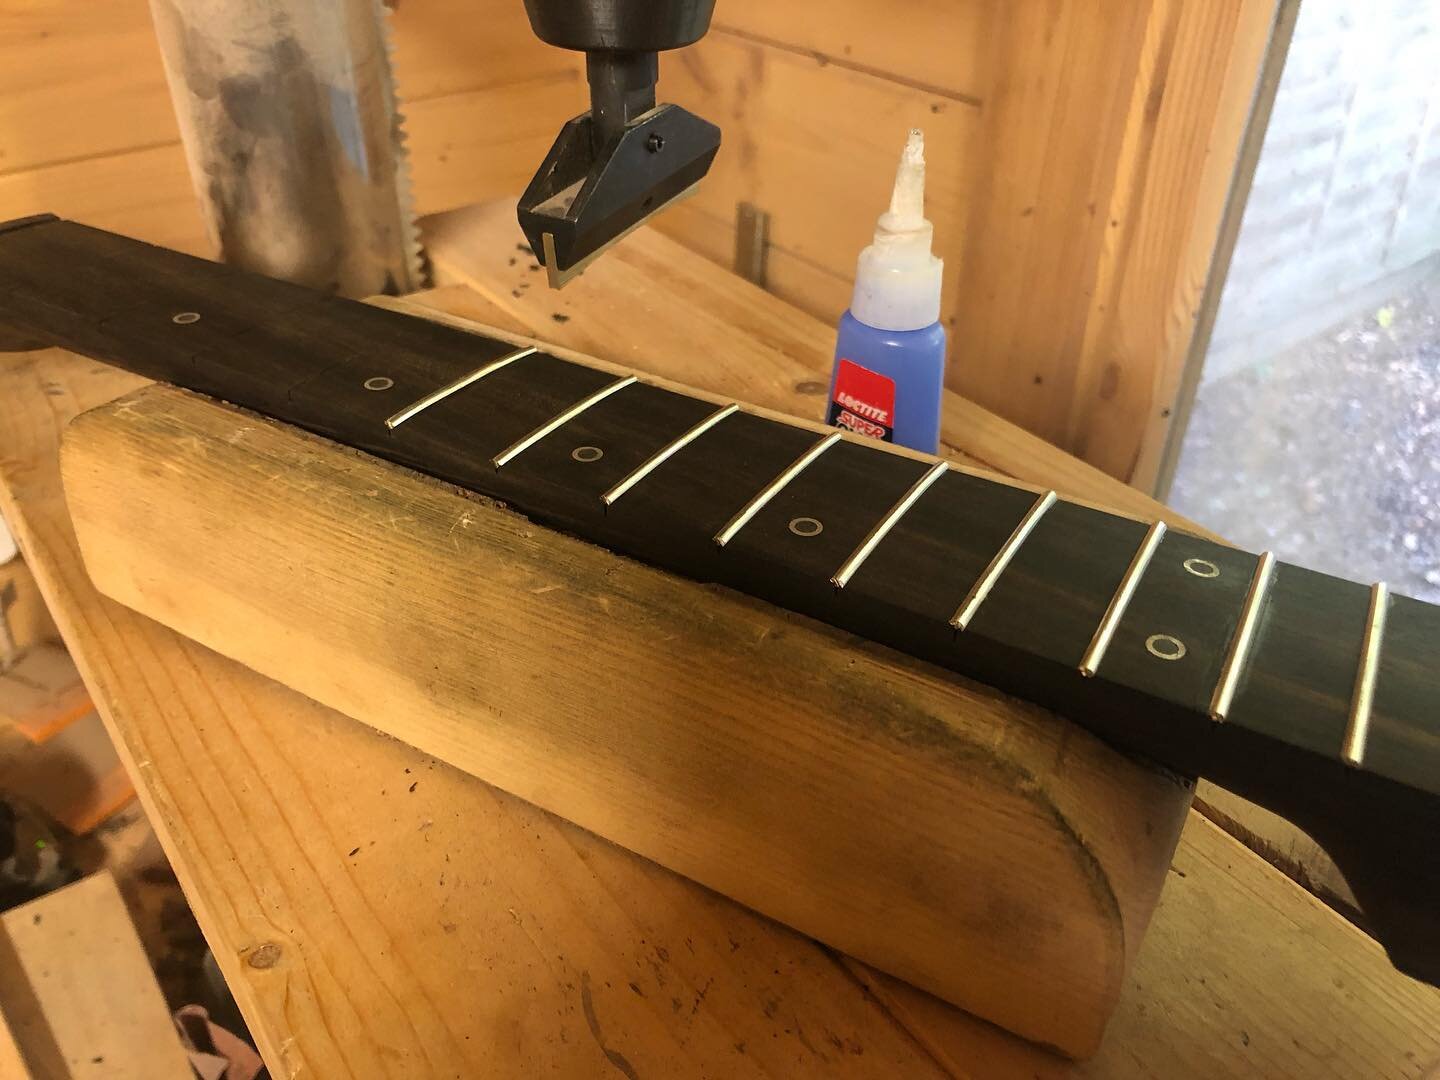 Putting in the frets on the latest build 👍
&middot;
🙂 For more info on my guitars go to www.mayburyguitars.com #telecaster #guitar #fretboard #luthiery #boutiqueguitars #ebony #tele #guitarforsale #guitarbody #handmadeguitar #madeinengland #luthier